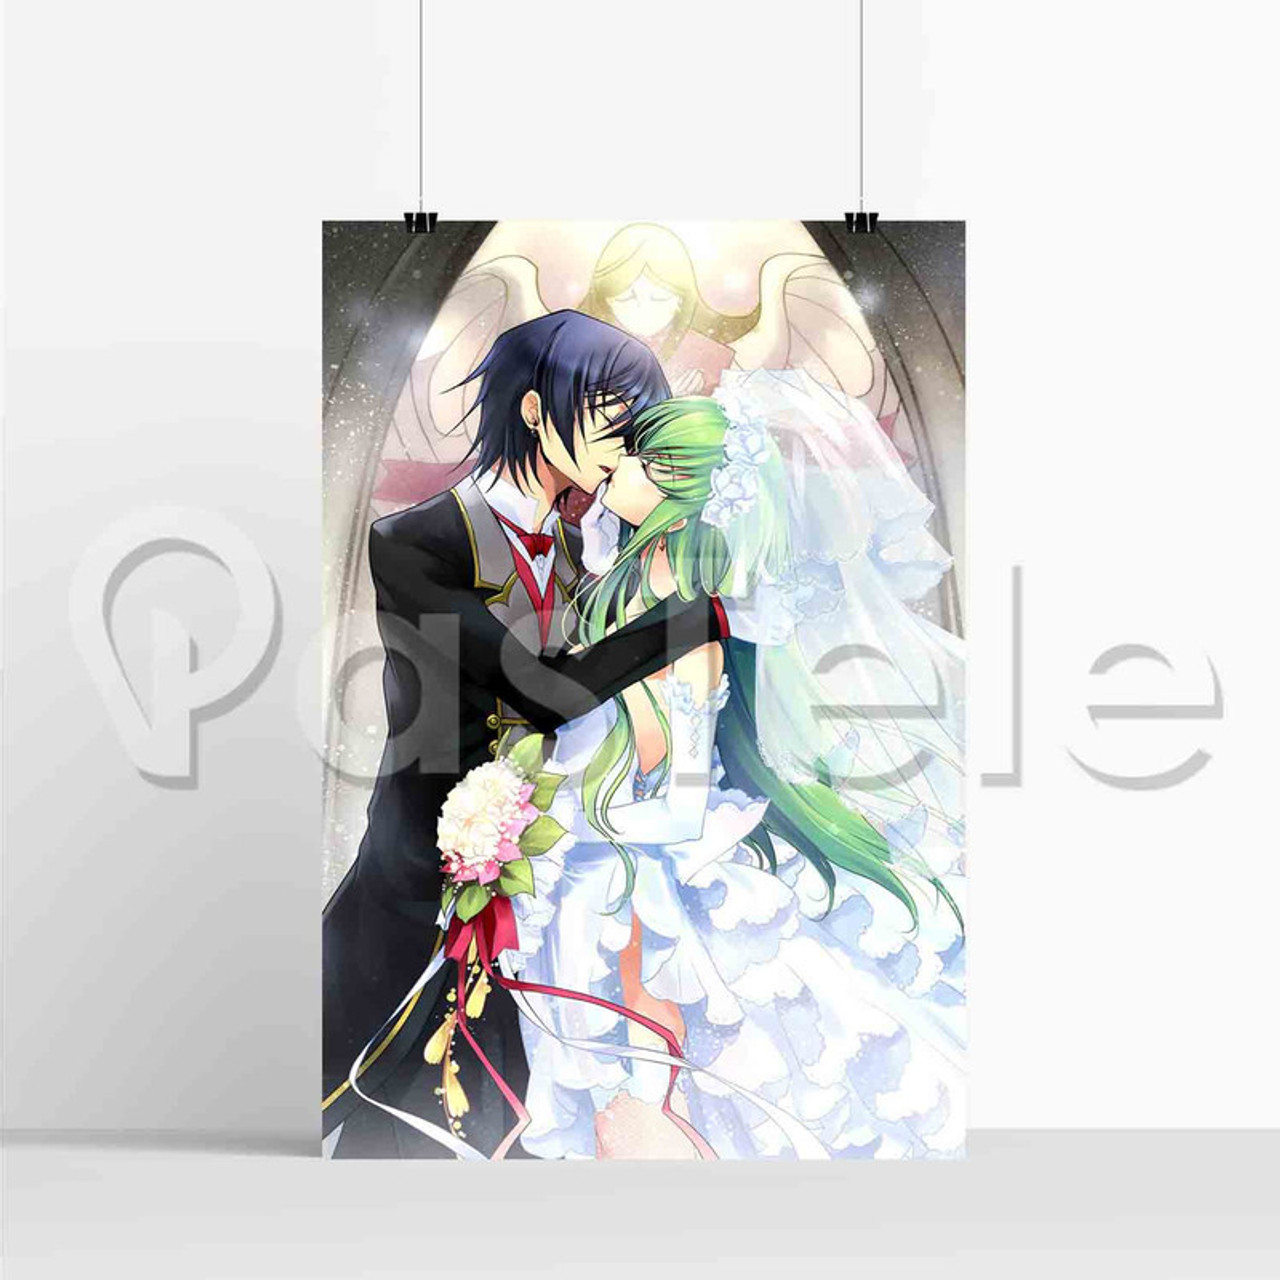 Code Geass Lelouch Lamperouge Anime Illustrated Poster 5